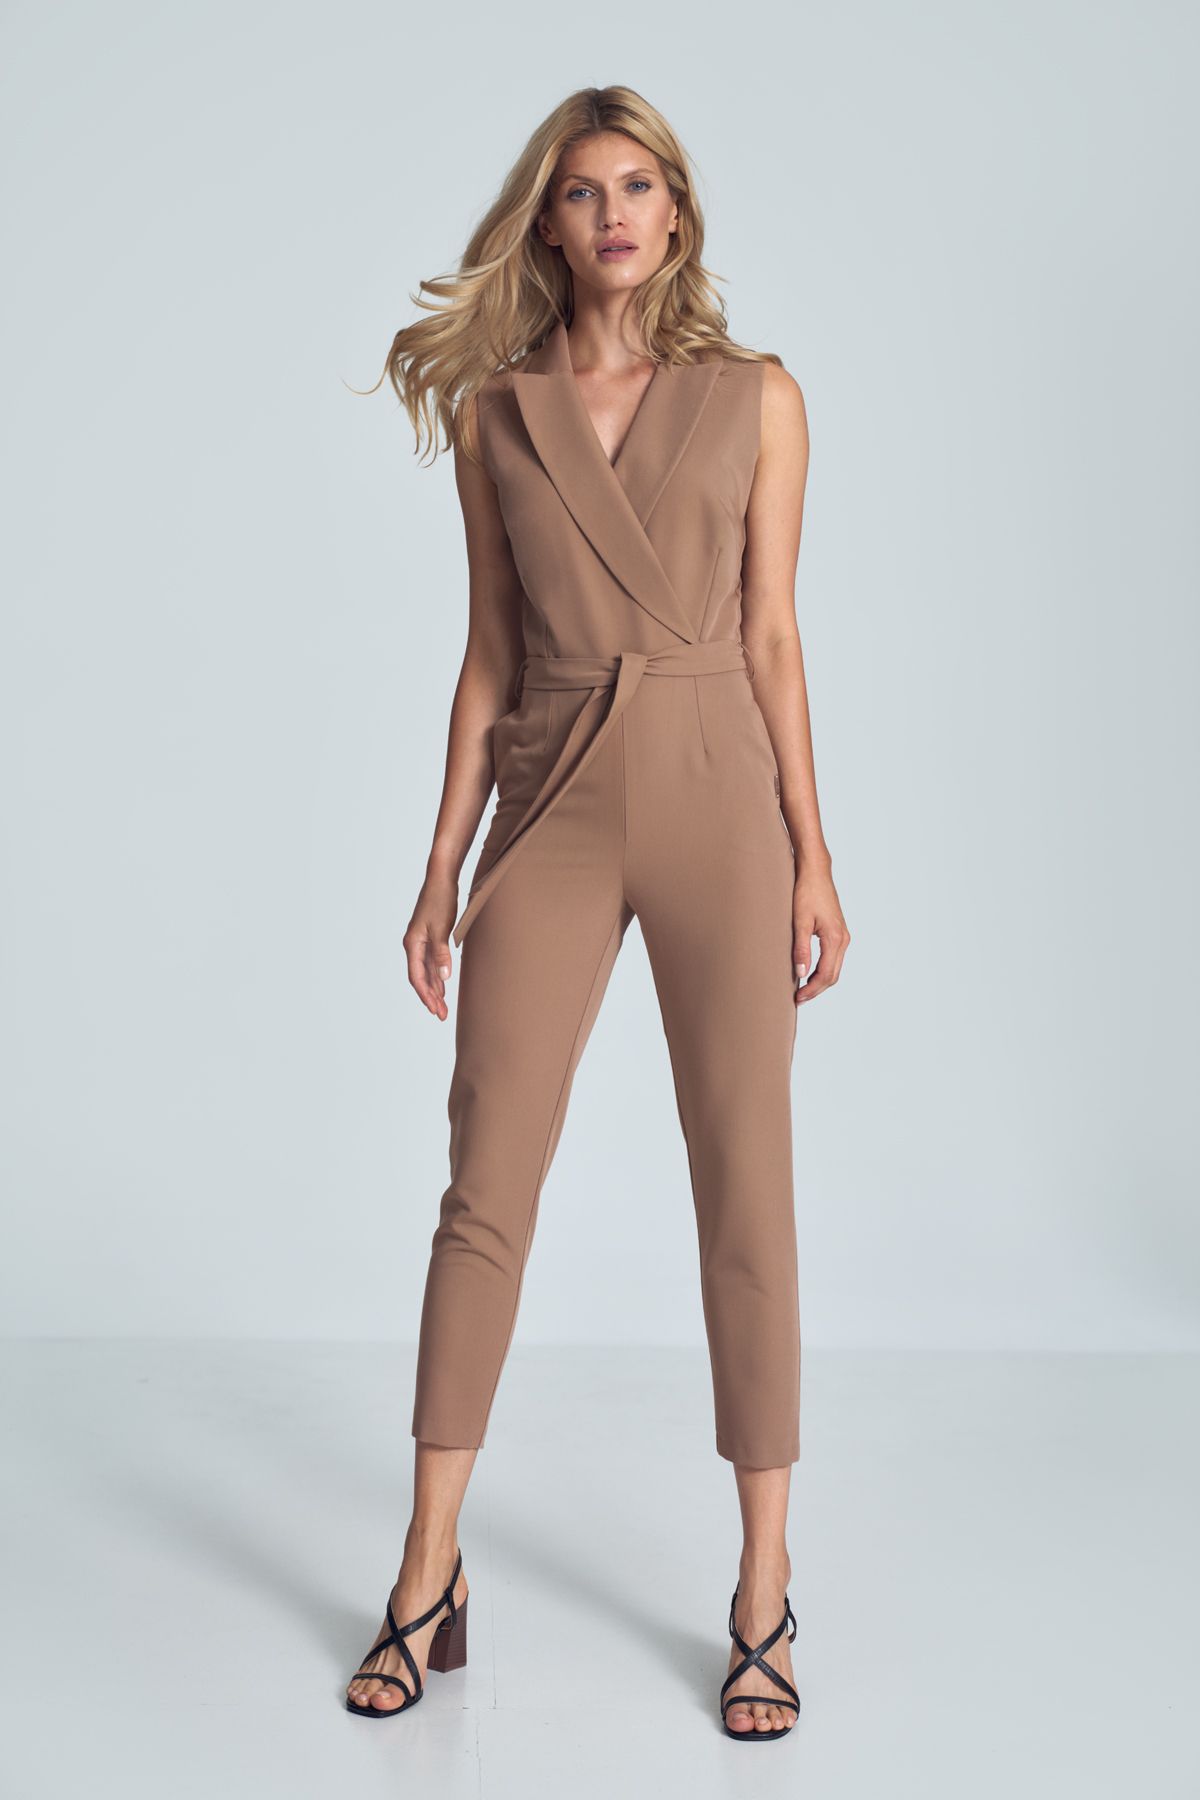 Brown V-neck jumpsuit with a collar, sleeveless, tied at the waist, loose legs tapered to the bottom. Fastened at the front at the waist with one external and internal snaps and a covered zipper. Pockets in the side seams.